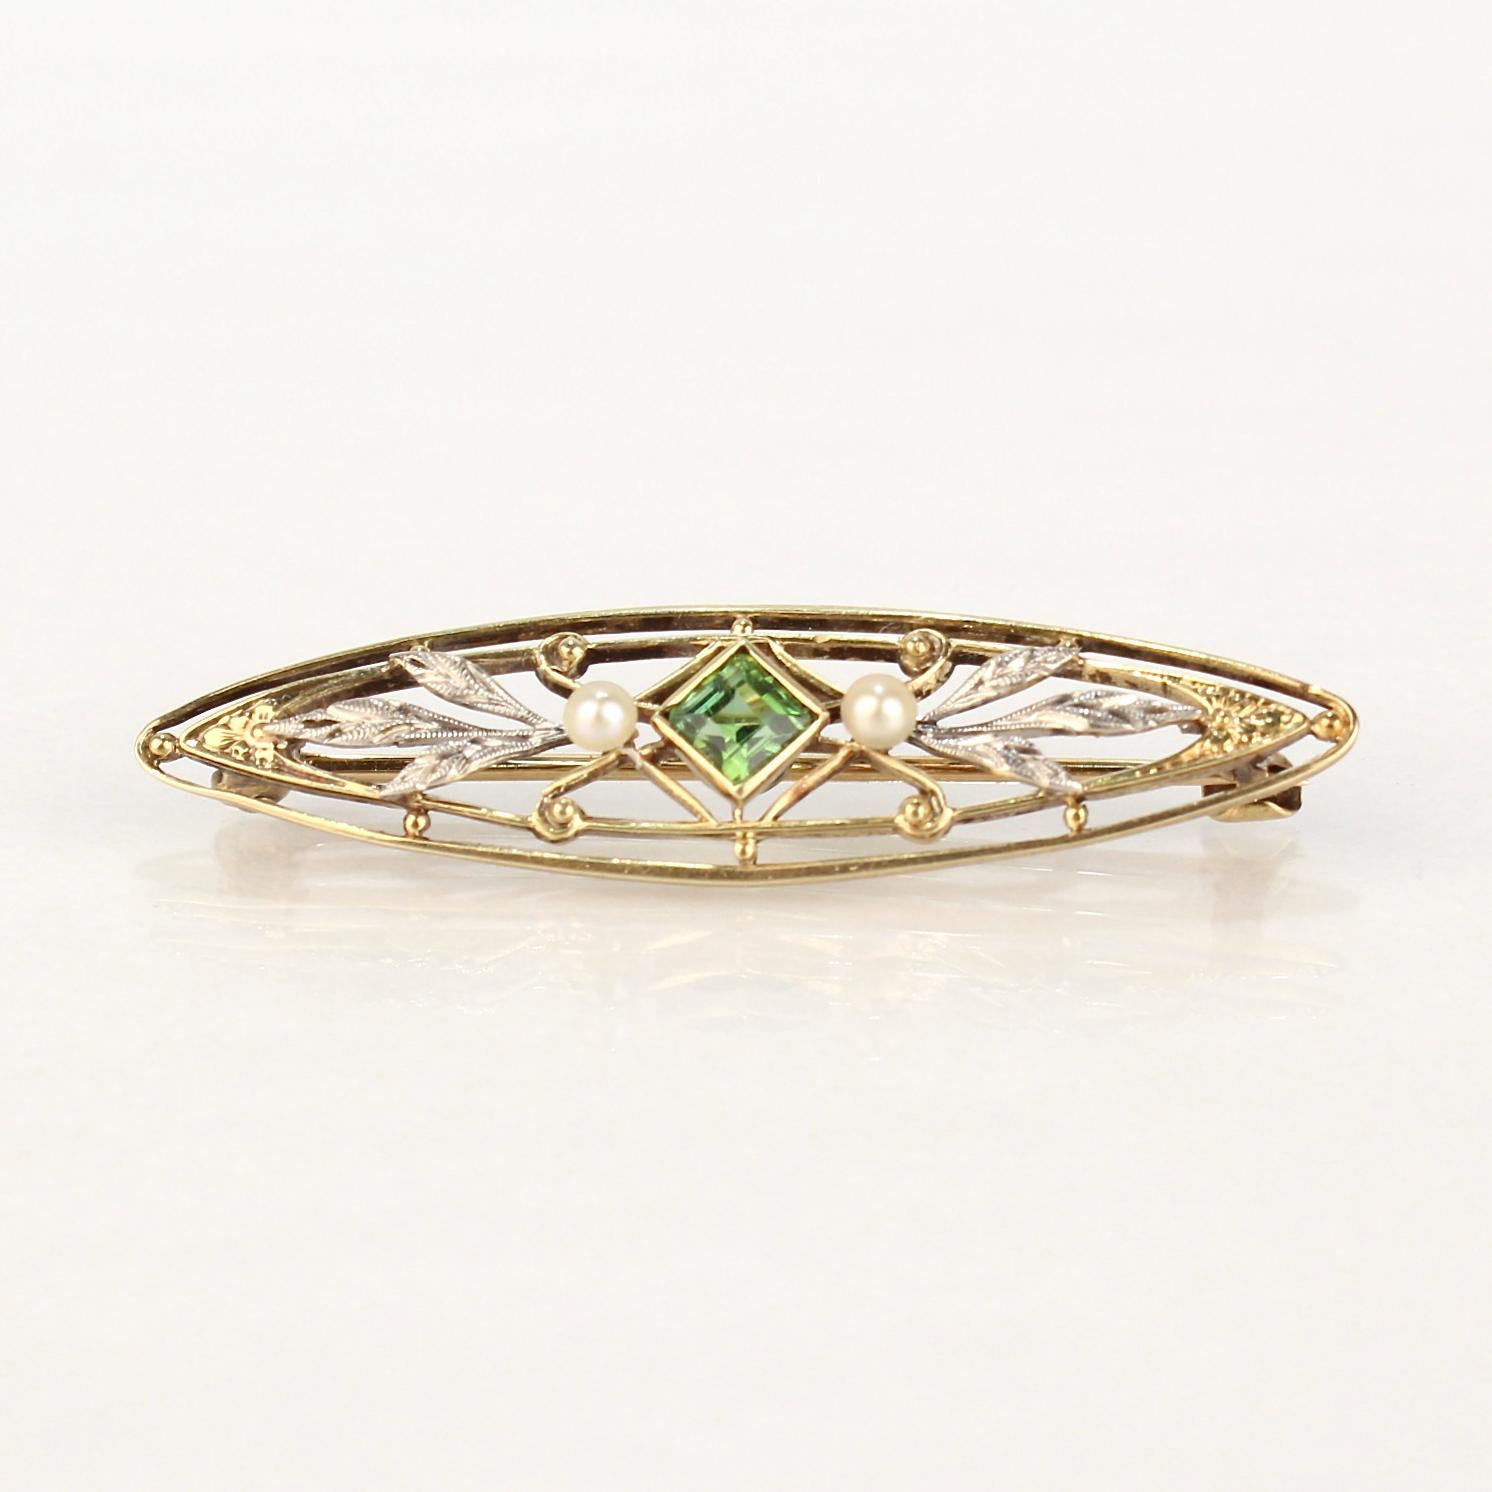 A fine American Art Nouveau Krementz pin.

In 14k gold with reticulation, platinum topped leaves, and a bezel set green amethyst at its center.

Simply a wonderful, delicate piece of American Edwardian period jewelry!  

Date:
Late 19th or very